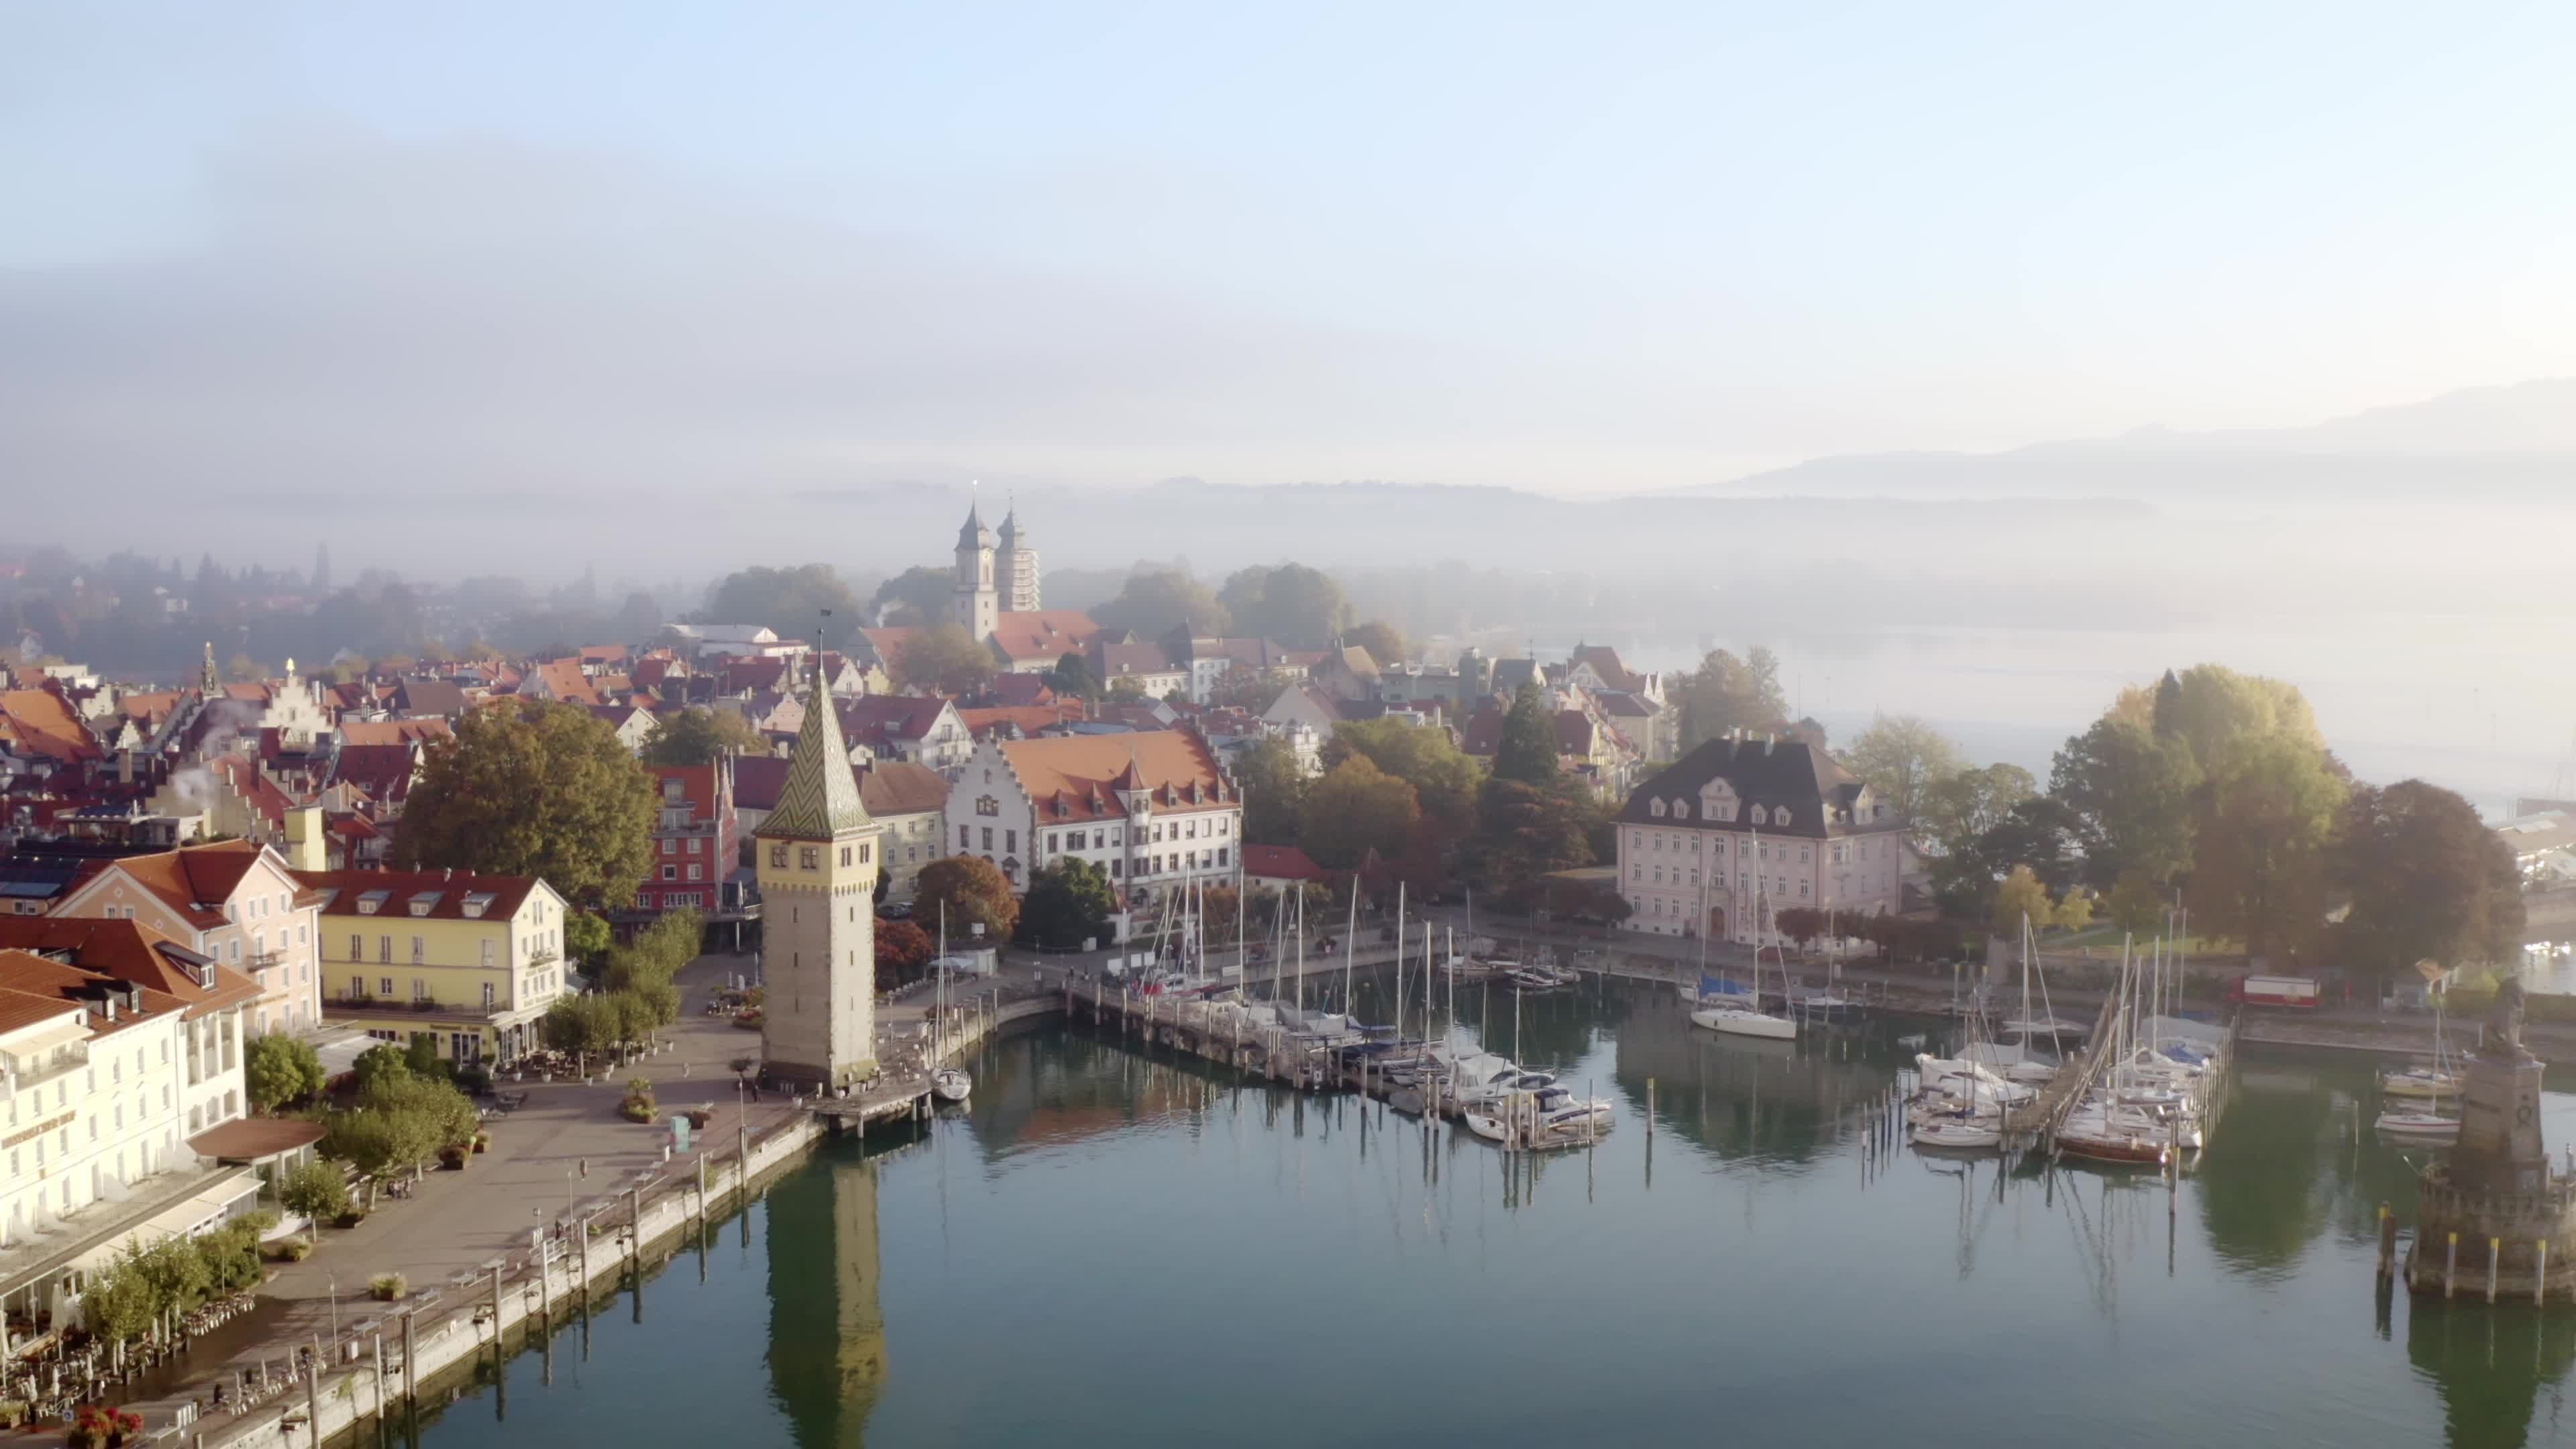 Town: Lindau, A major settlement and island on the eastern side of Lake Constance, Bavaria. 3840x2160 4K Background.